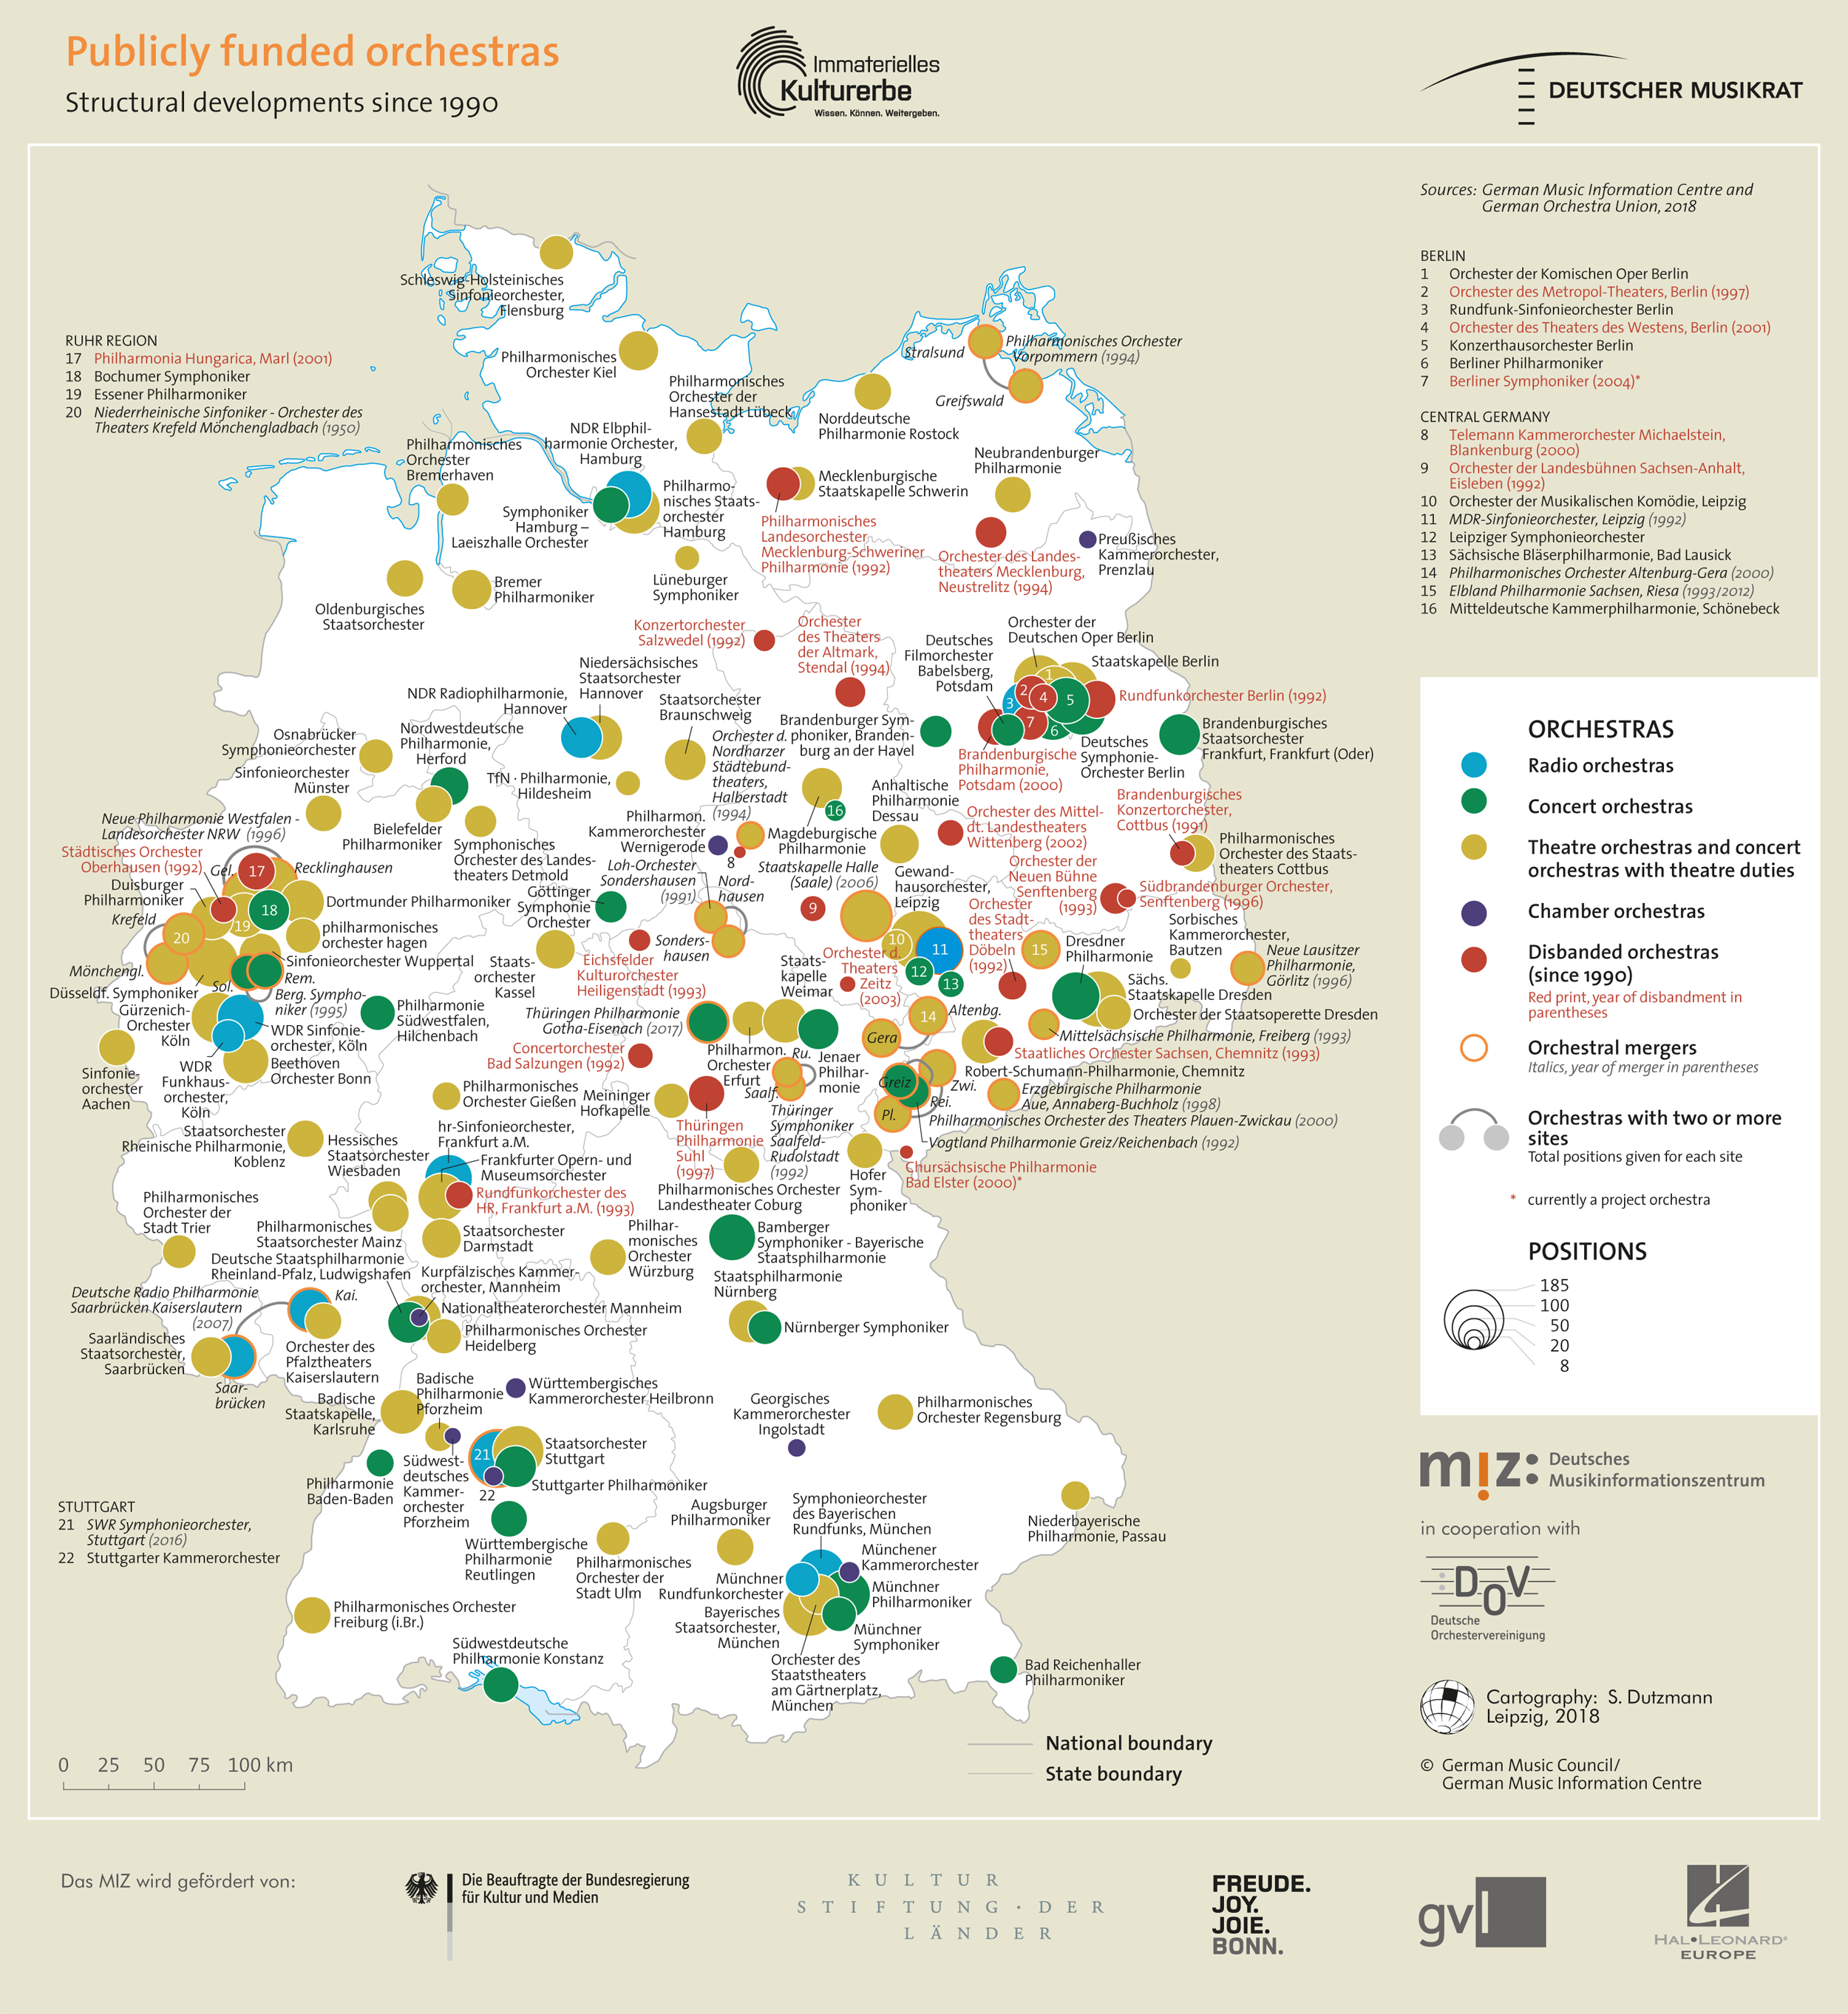 Topography: Publicly funded orchestras in Germany